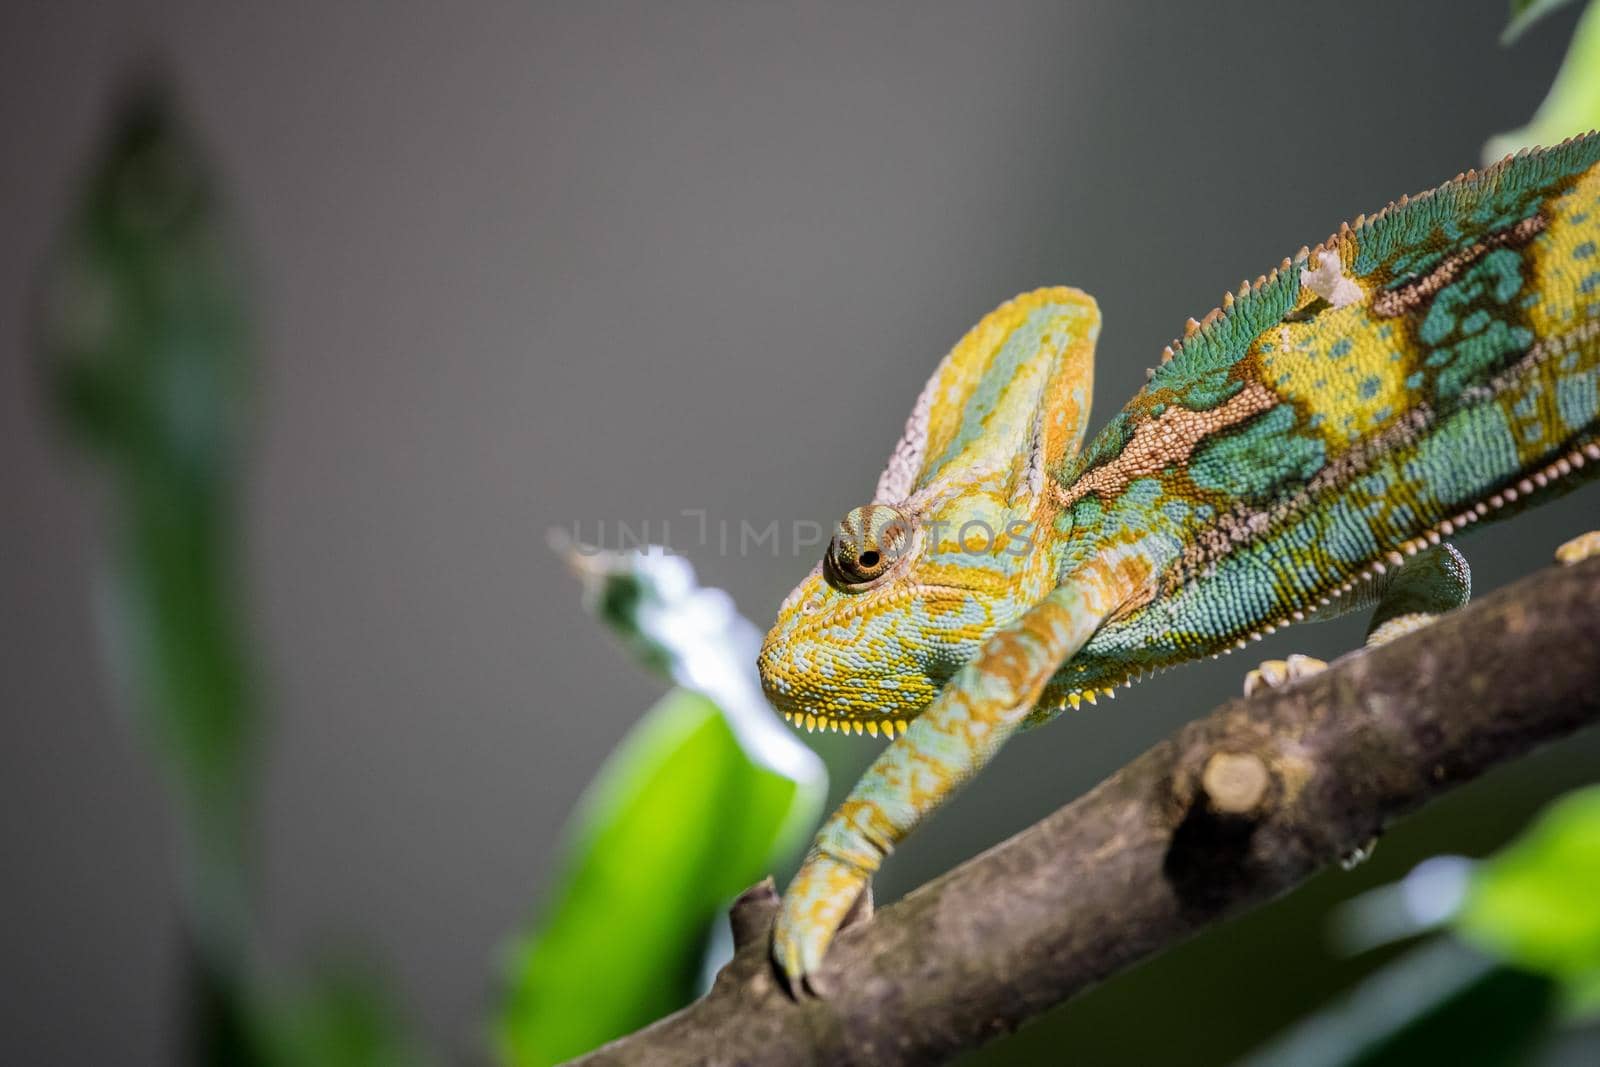 Chameleon in the zoo: Close-up picture of a chameleon climbing on a tree branch by Daxenbichler